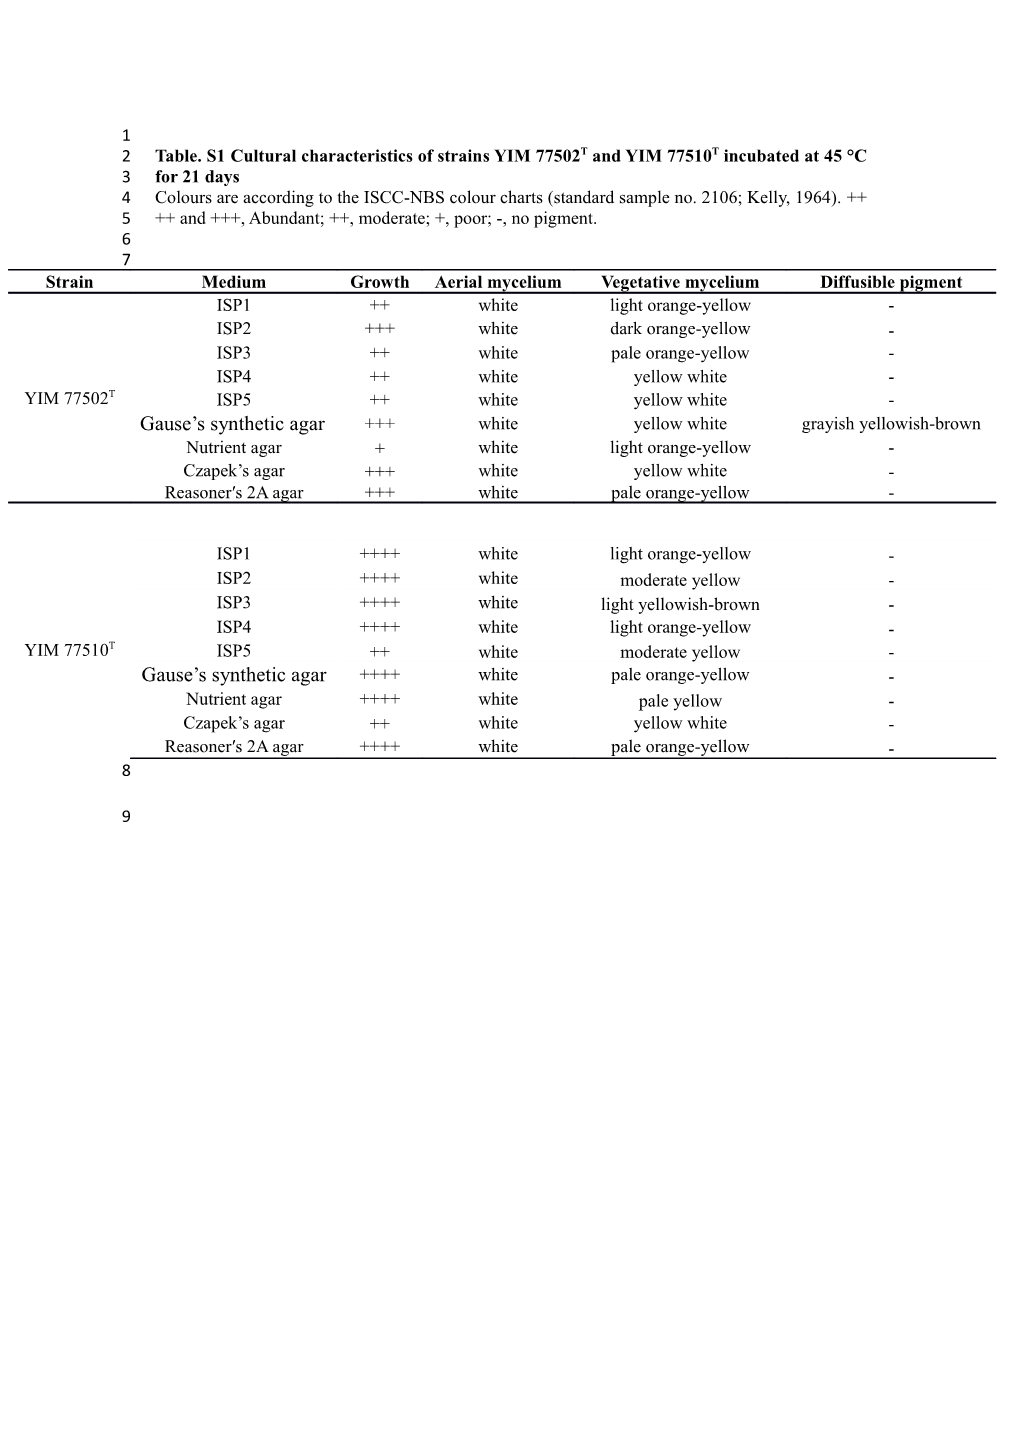 Table.S1cultural Characteristics of Strains YIM 77502T and YIM 77510T Incubated at 45